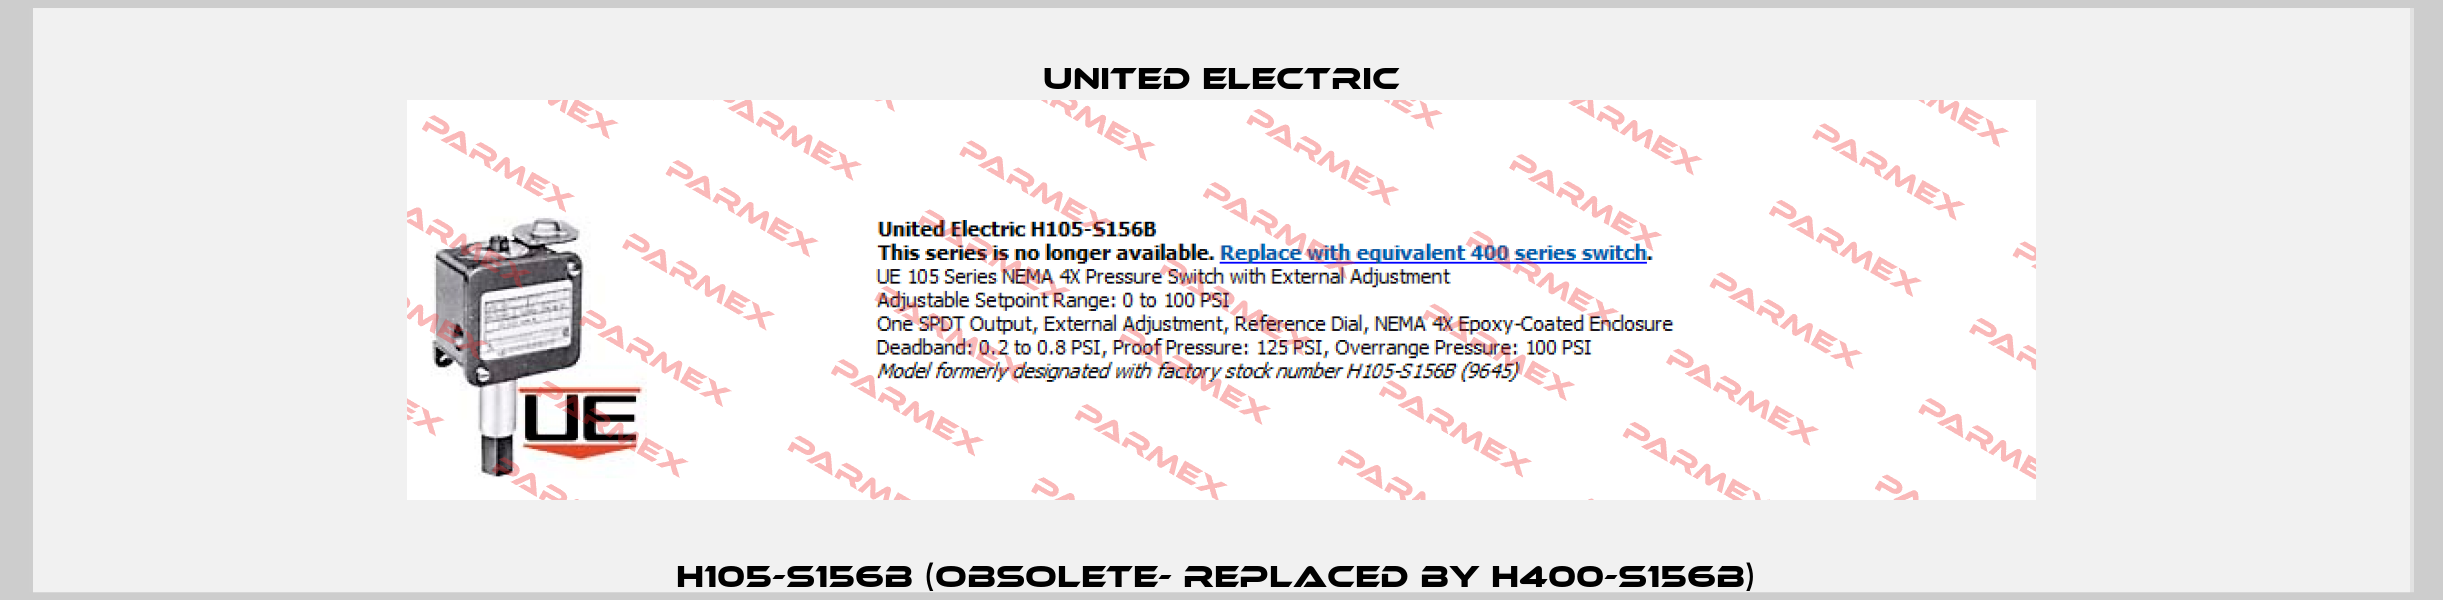 H105-S156B (obsolete- replaced by H400-S156B)  United Electric